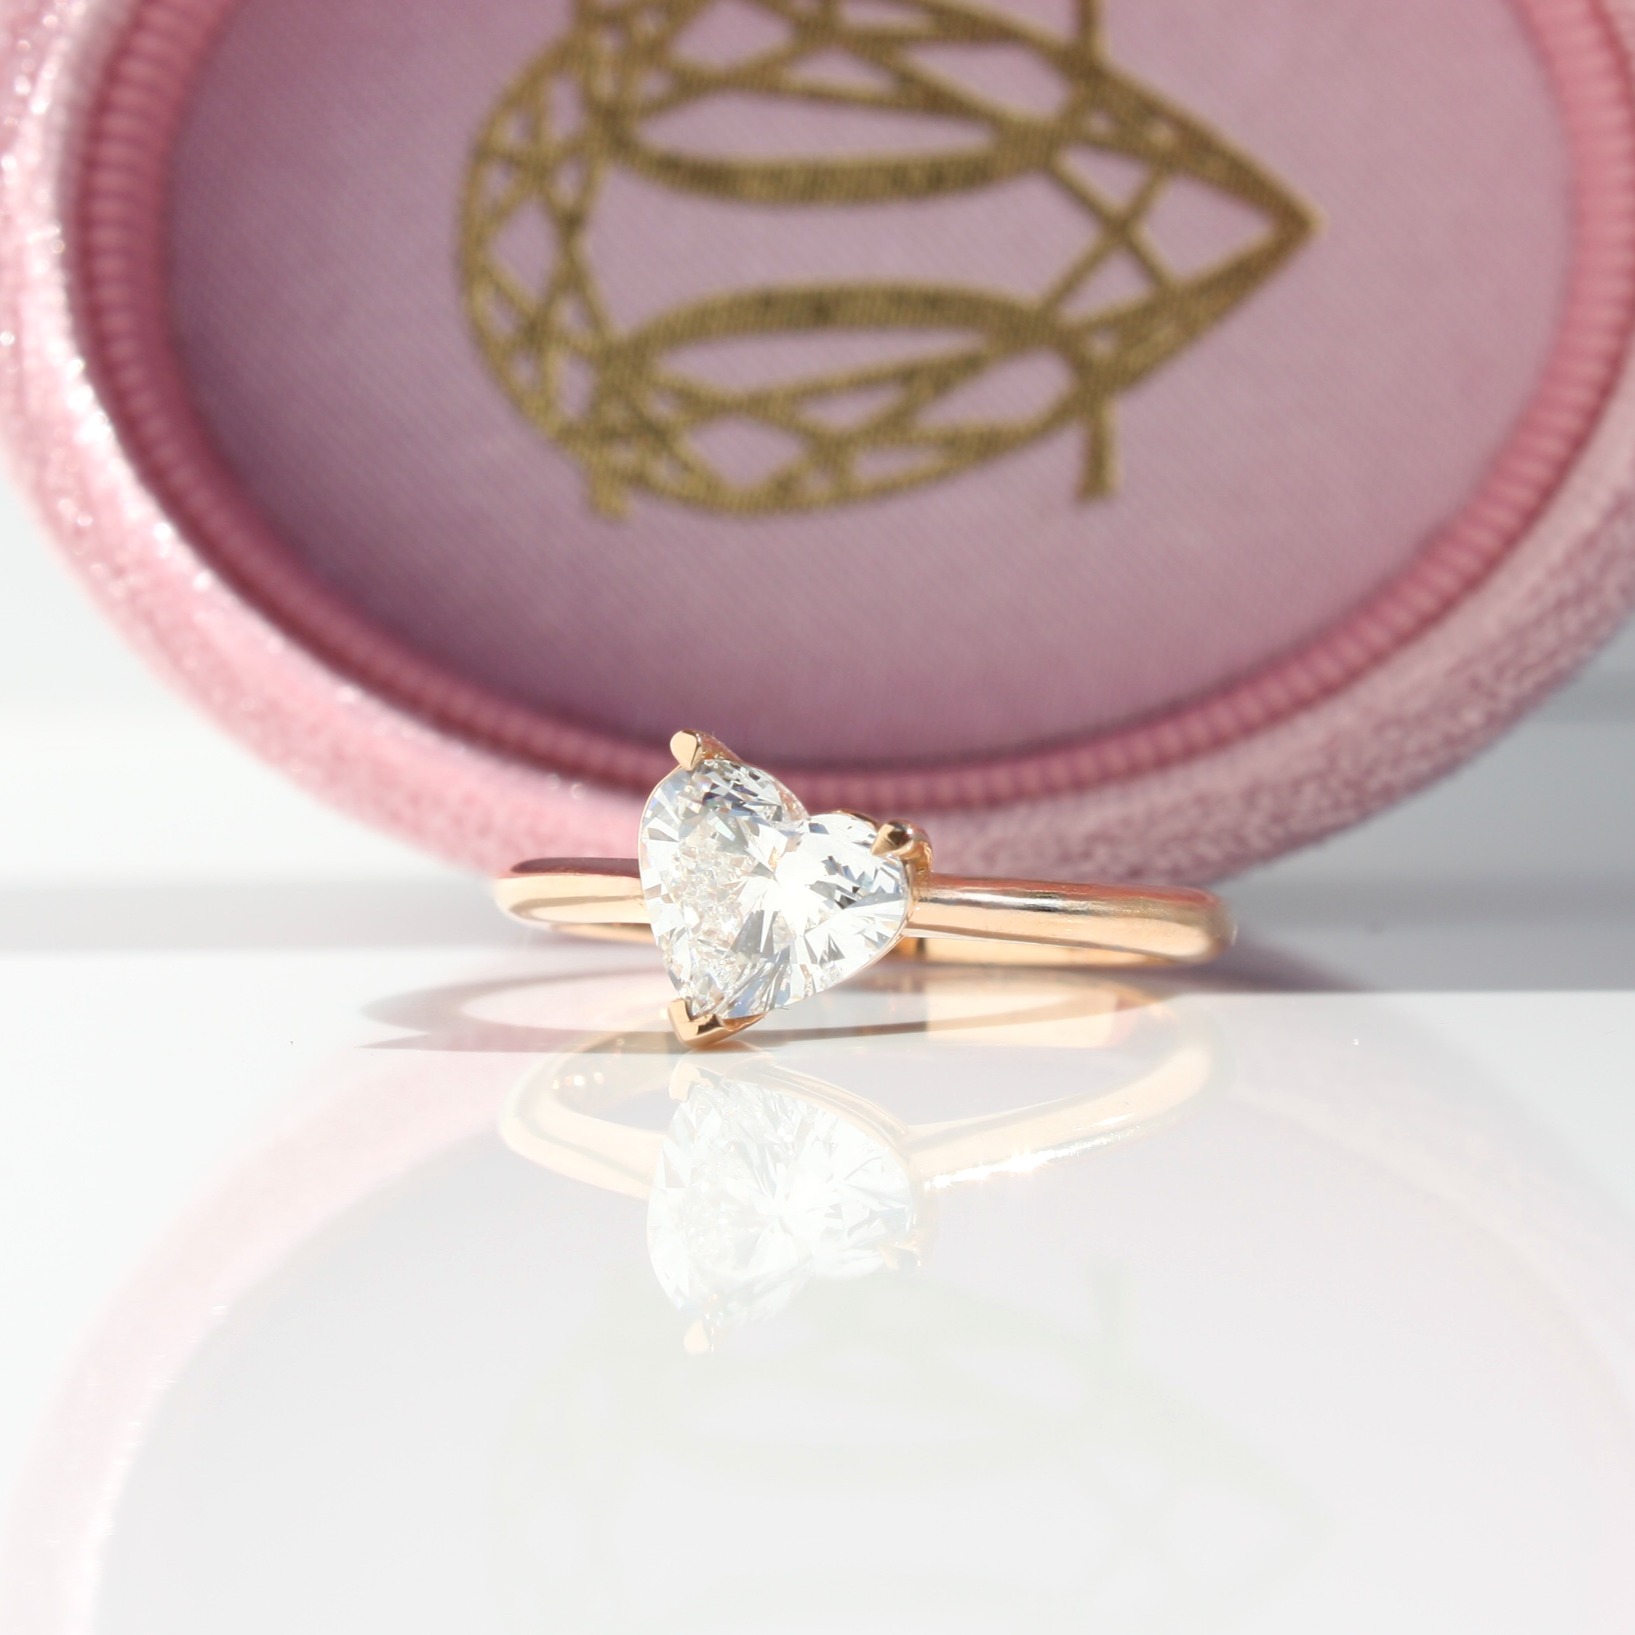 Heart cut Tilt Solitaire Ring, Engagement Ring, Lab grown diamond Ring, Solitaire diamond Ring, heart diamond, lab grown diamond, Recycled Gold, Danielle Camera Jewellery.